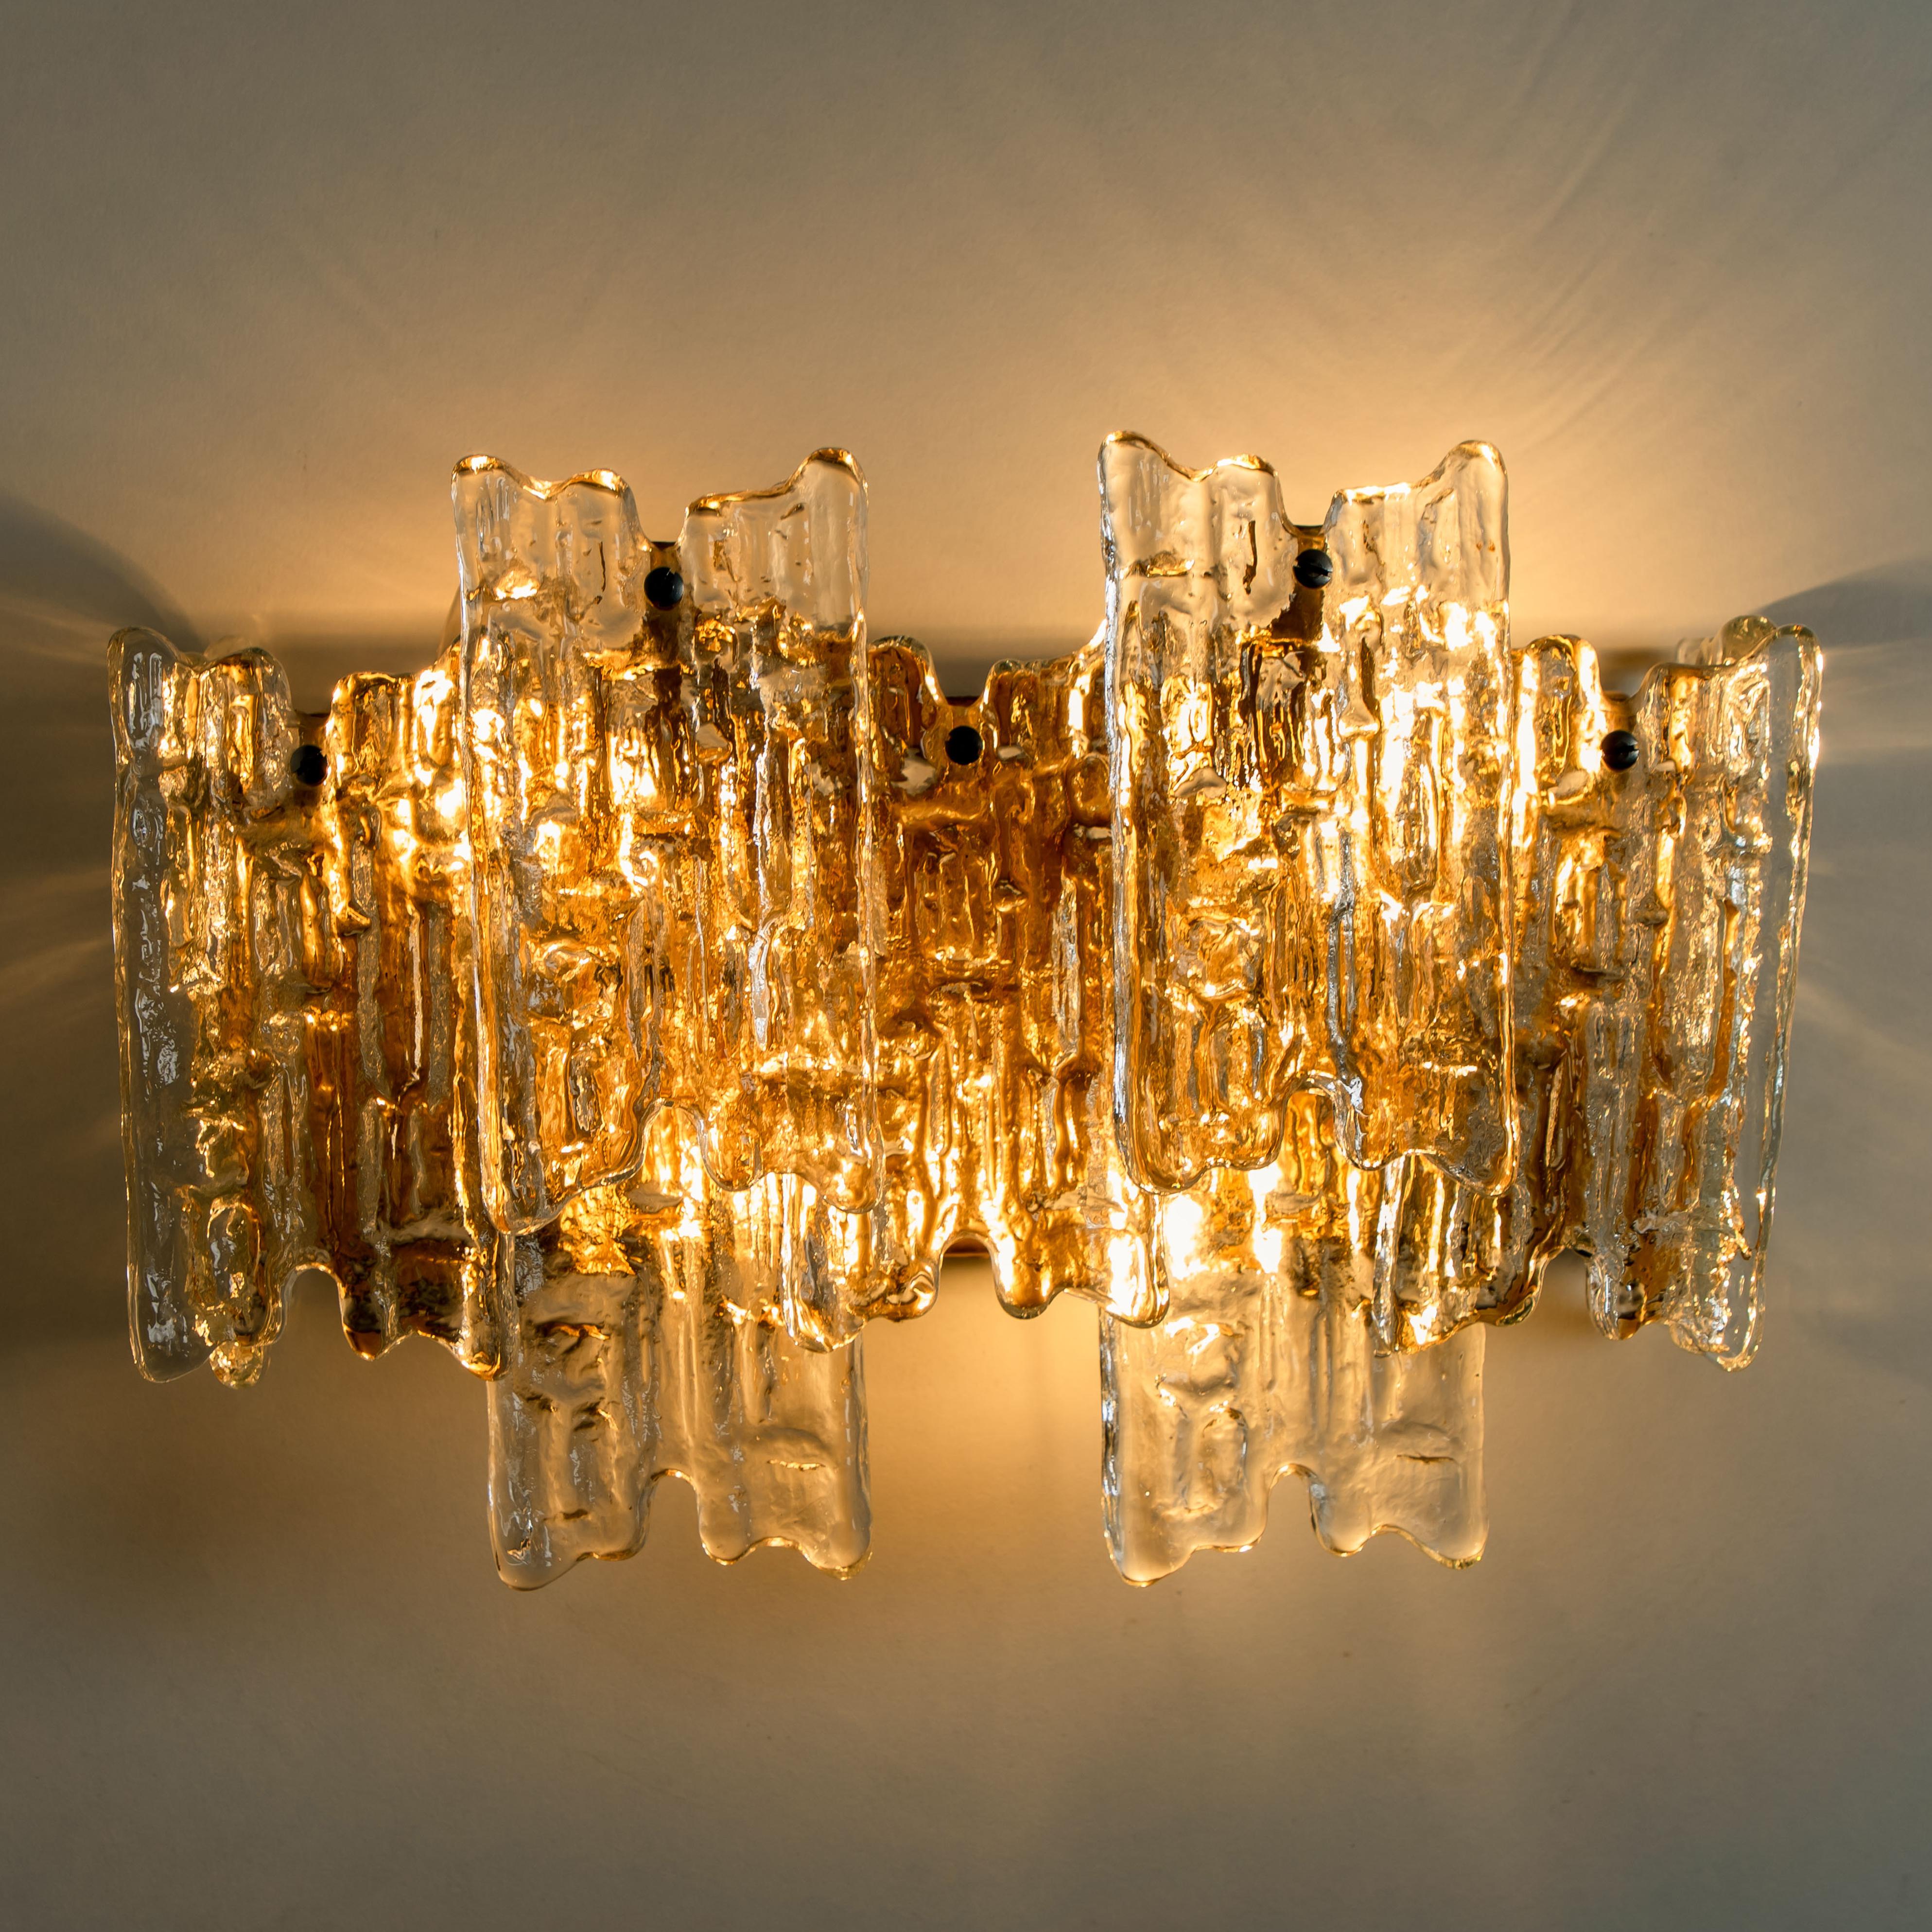 Mid-20th Century Wall Lights or Sconce, Manufactured by J.T. Kalmar Austria in the 1970s For Sale